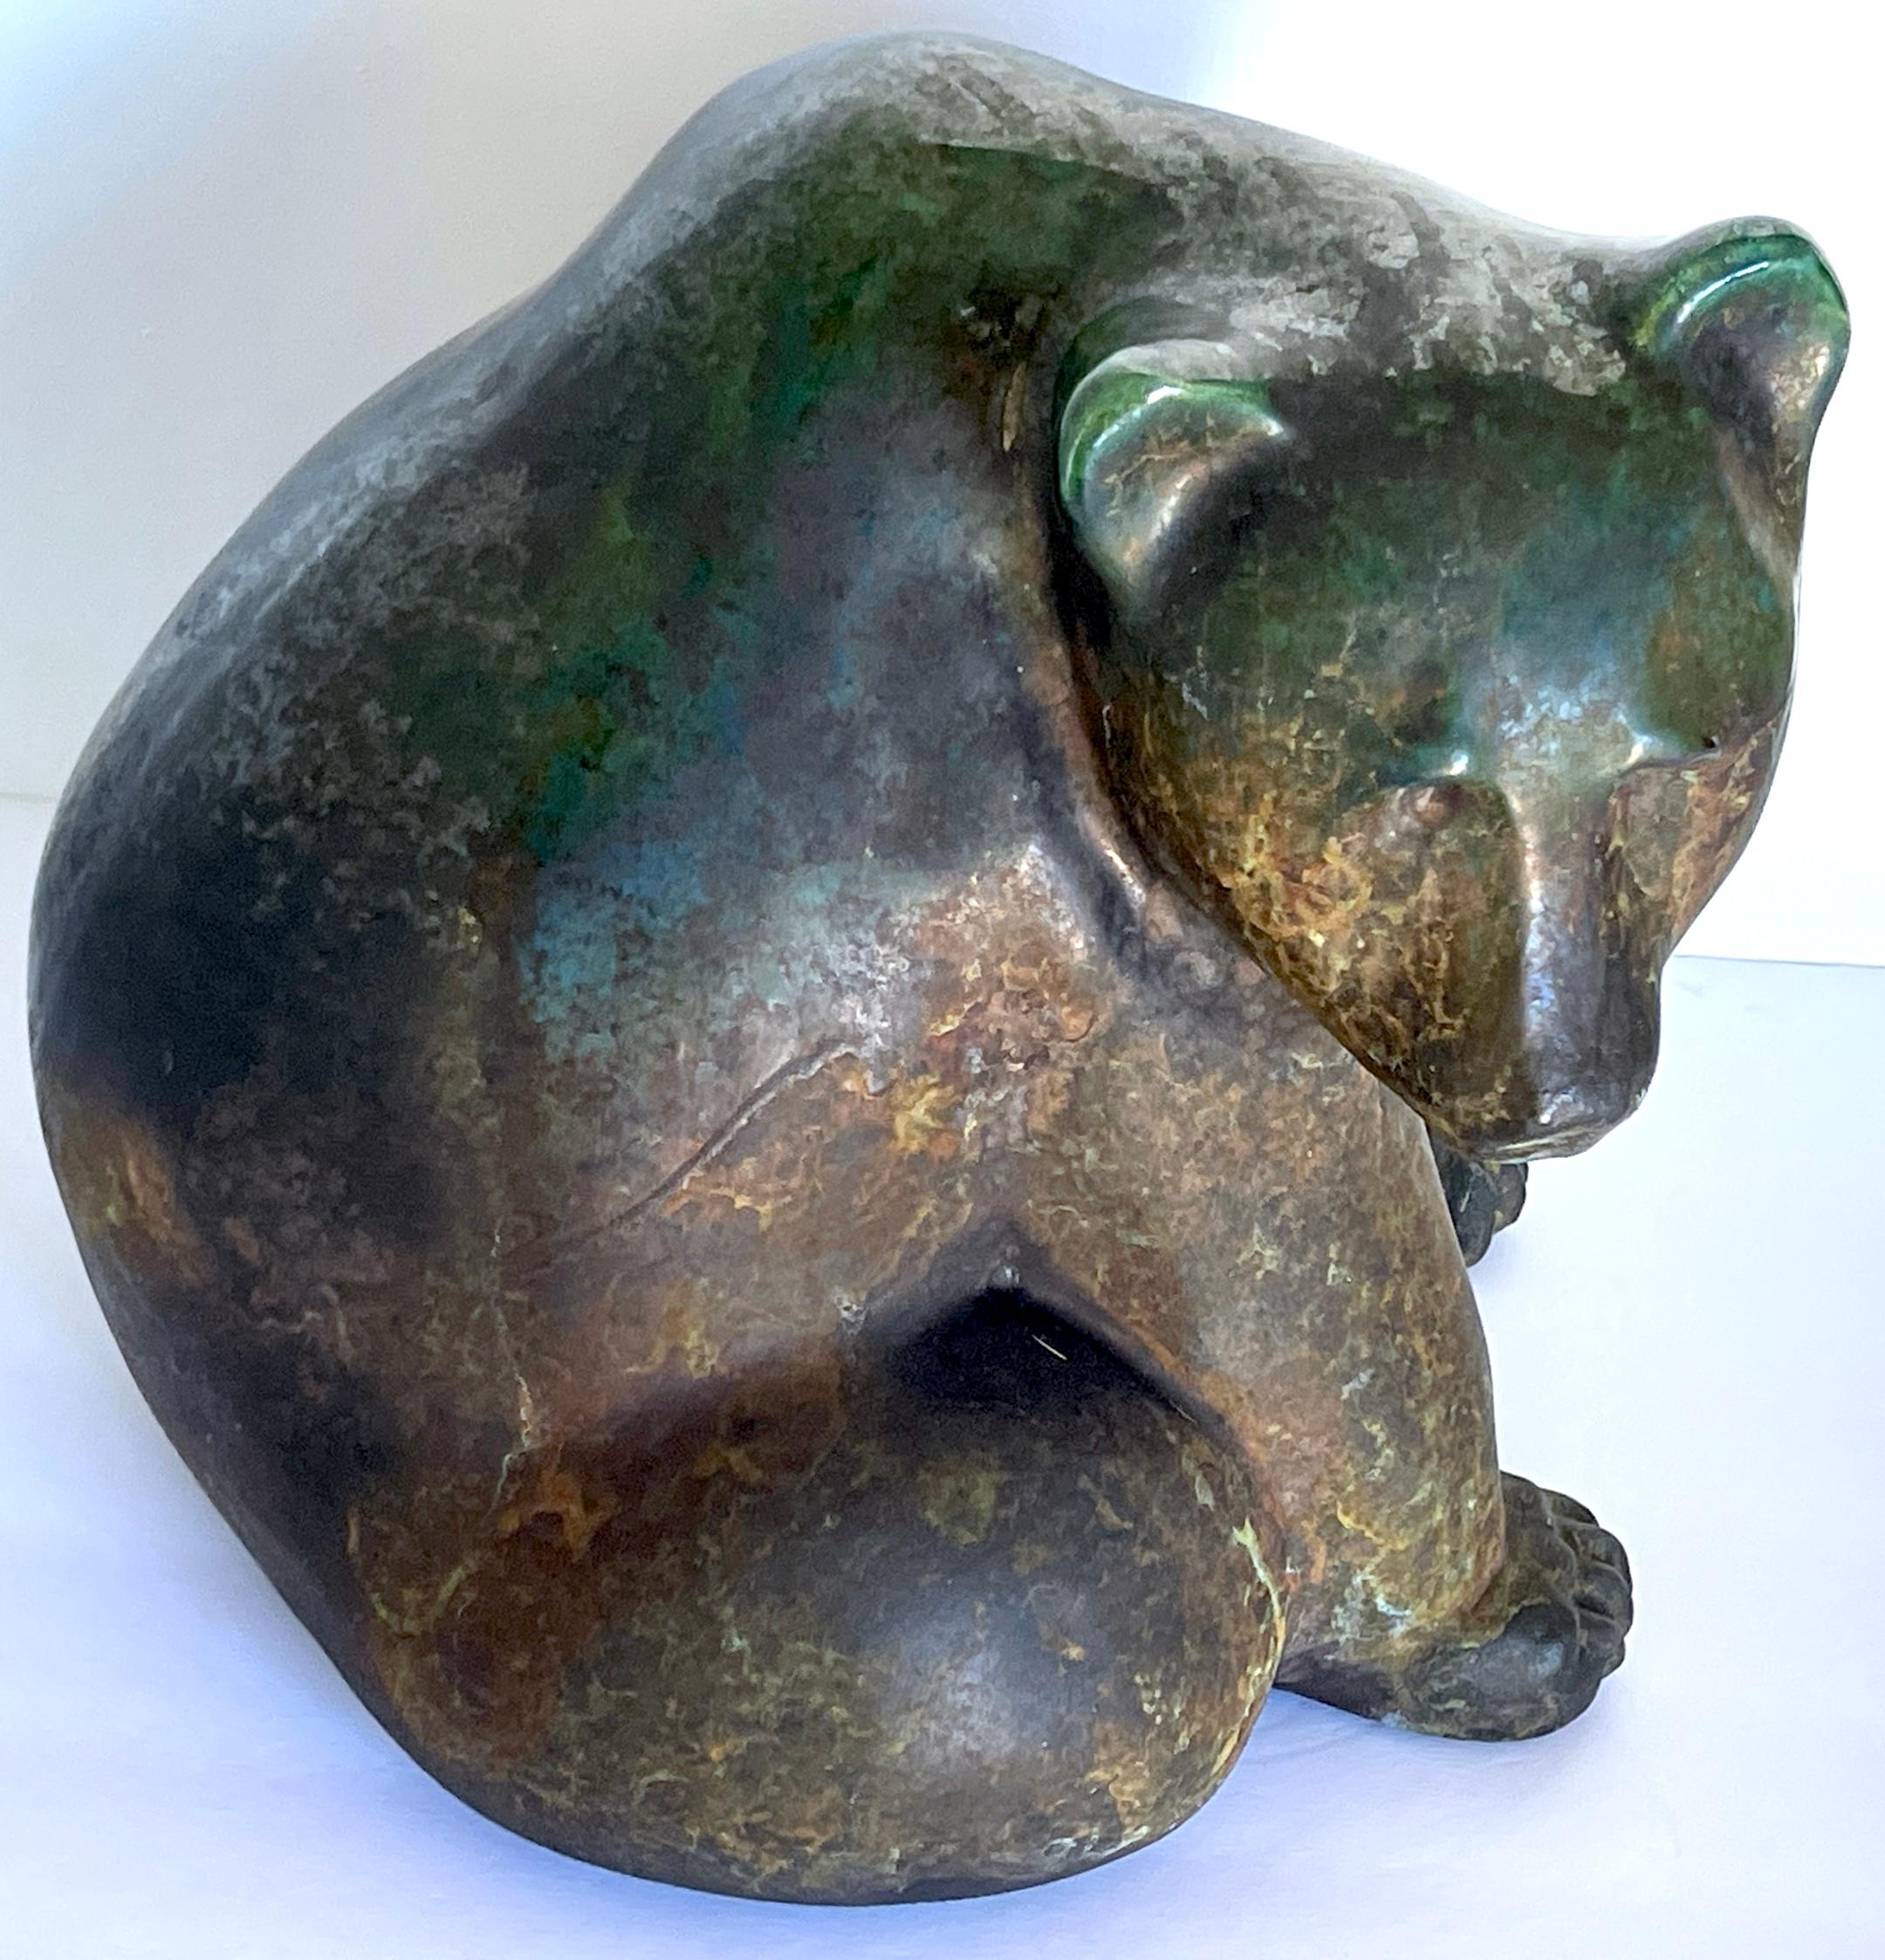 1988 Tony Evans Raku Big Bear Sculpture 
Signed 'Evans,88'
A remarkable 1988 The Tony Evans Raku Big Bear Sculpture is an exquisite piece of artistry. Crafted in Raku pottery, this large seated bear sculpture highlights Tony Evans' mastery of colors